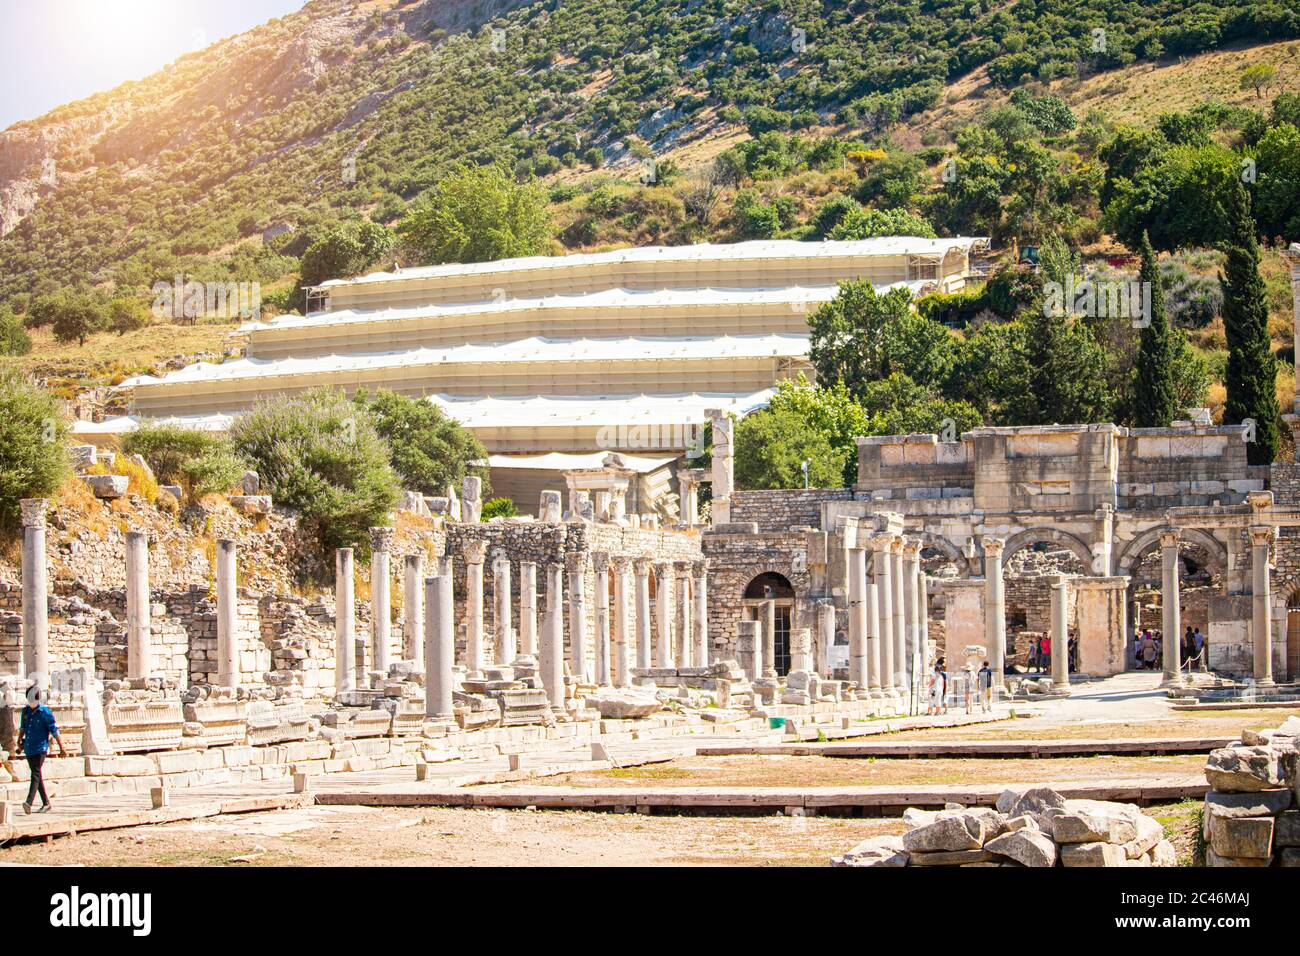 Ruins of the Agora in the Greek ancient city of Ephesus, Turkey. Stock Photo